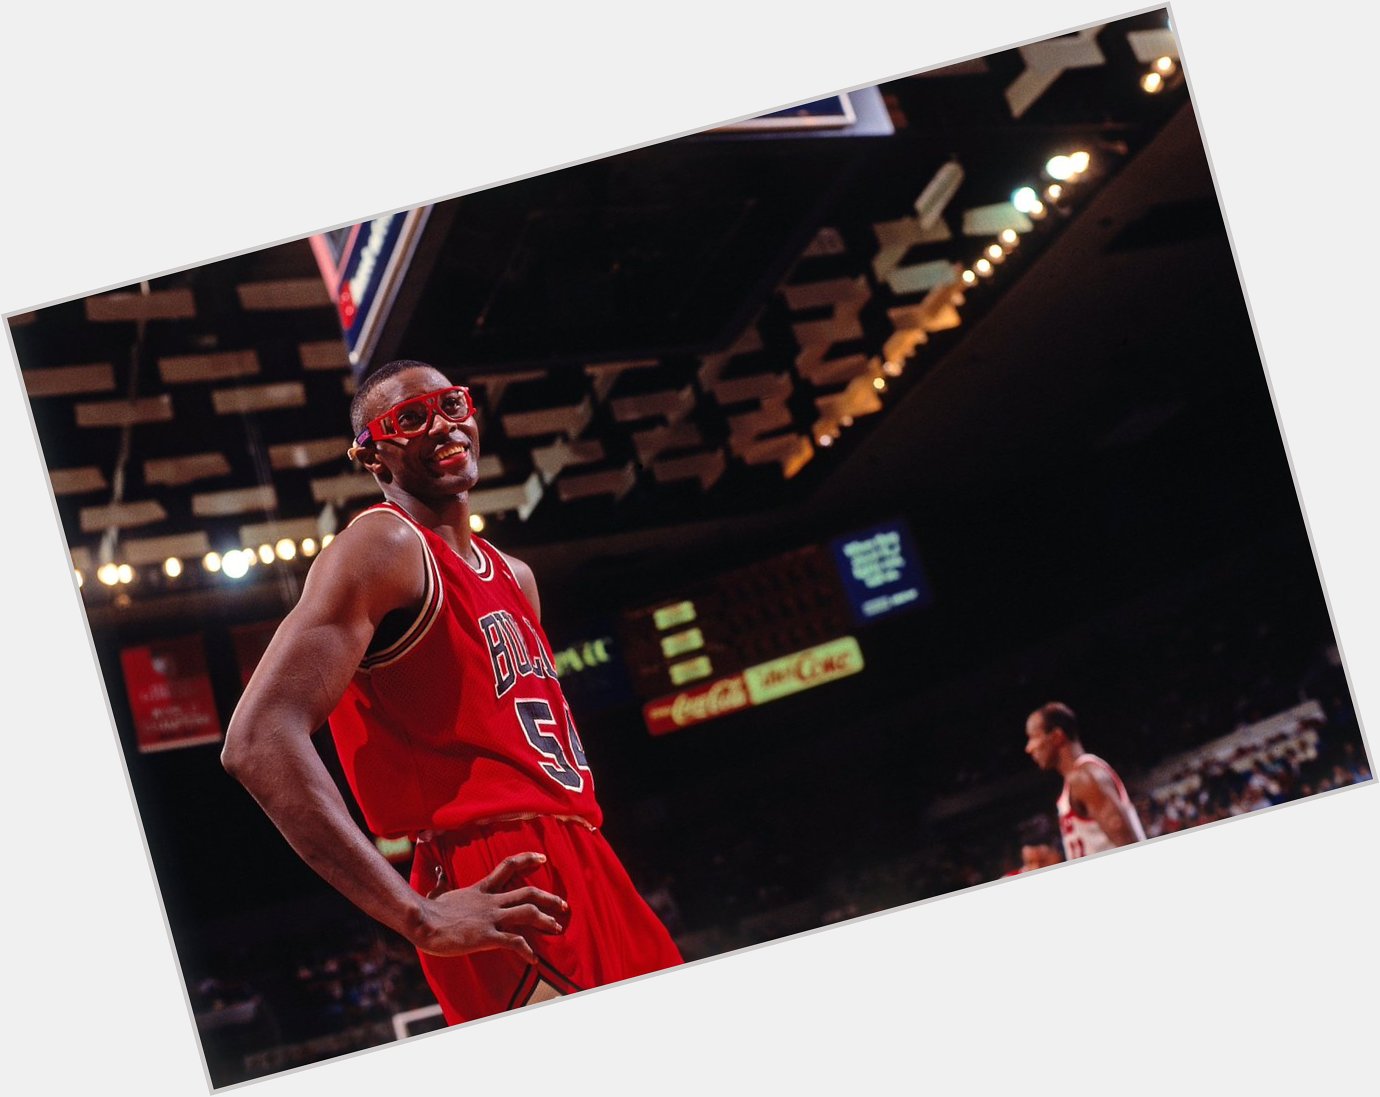 1146810853162913792chicagobulls: Happy Birthday to the one and only, Horace Grant  